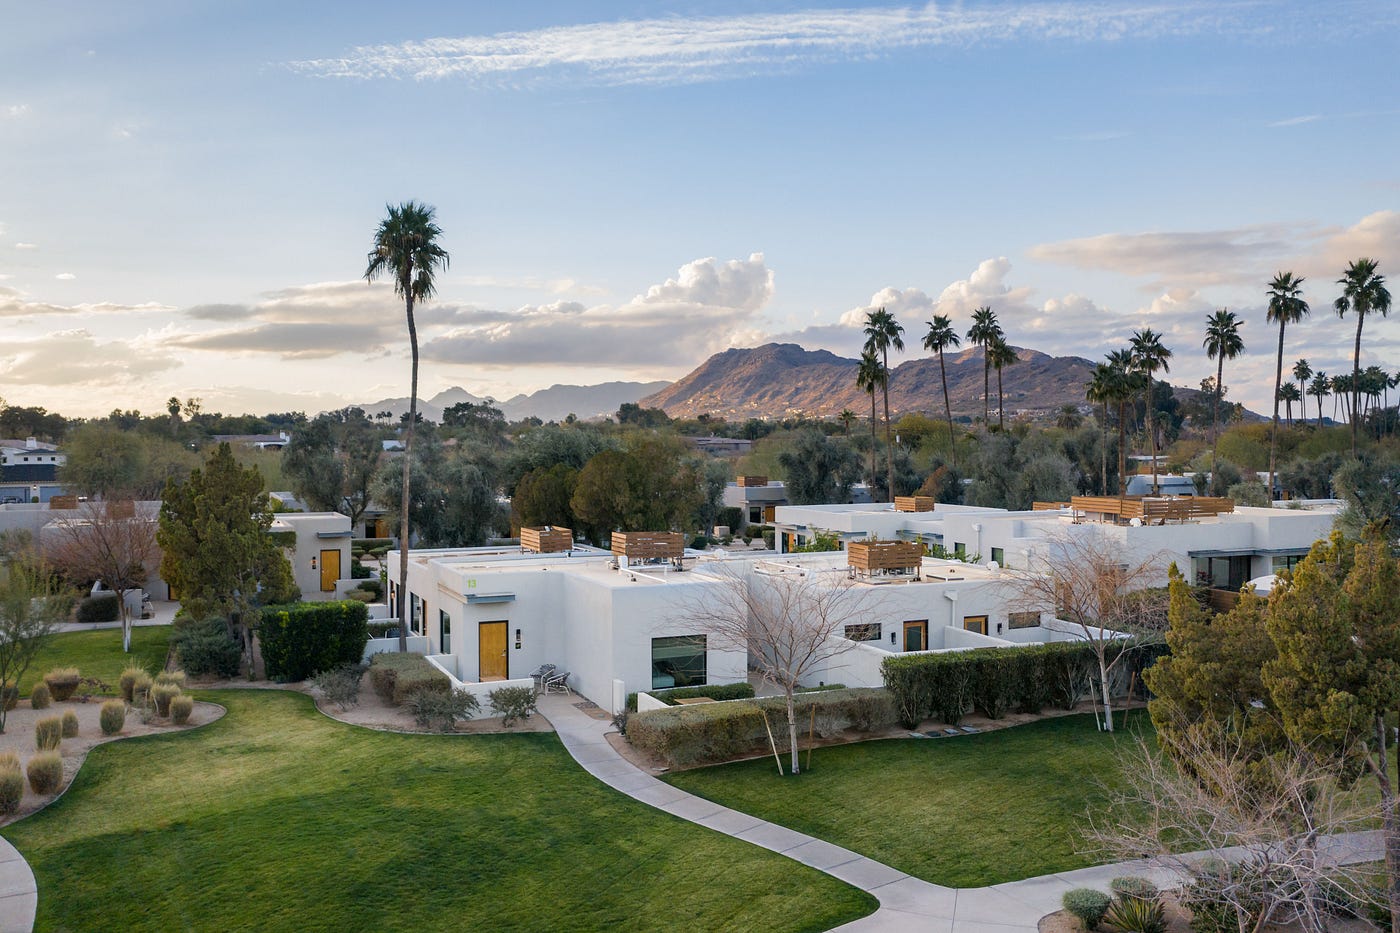 Andaz Scottsdale Resort Presents a Magnificent Sanctuary of Stunning Villas and Suites by Leslie E picture photo